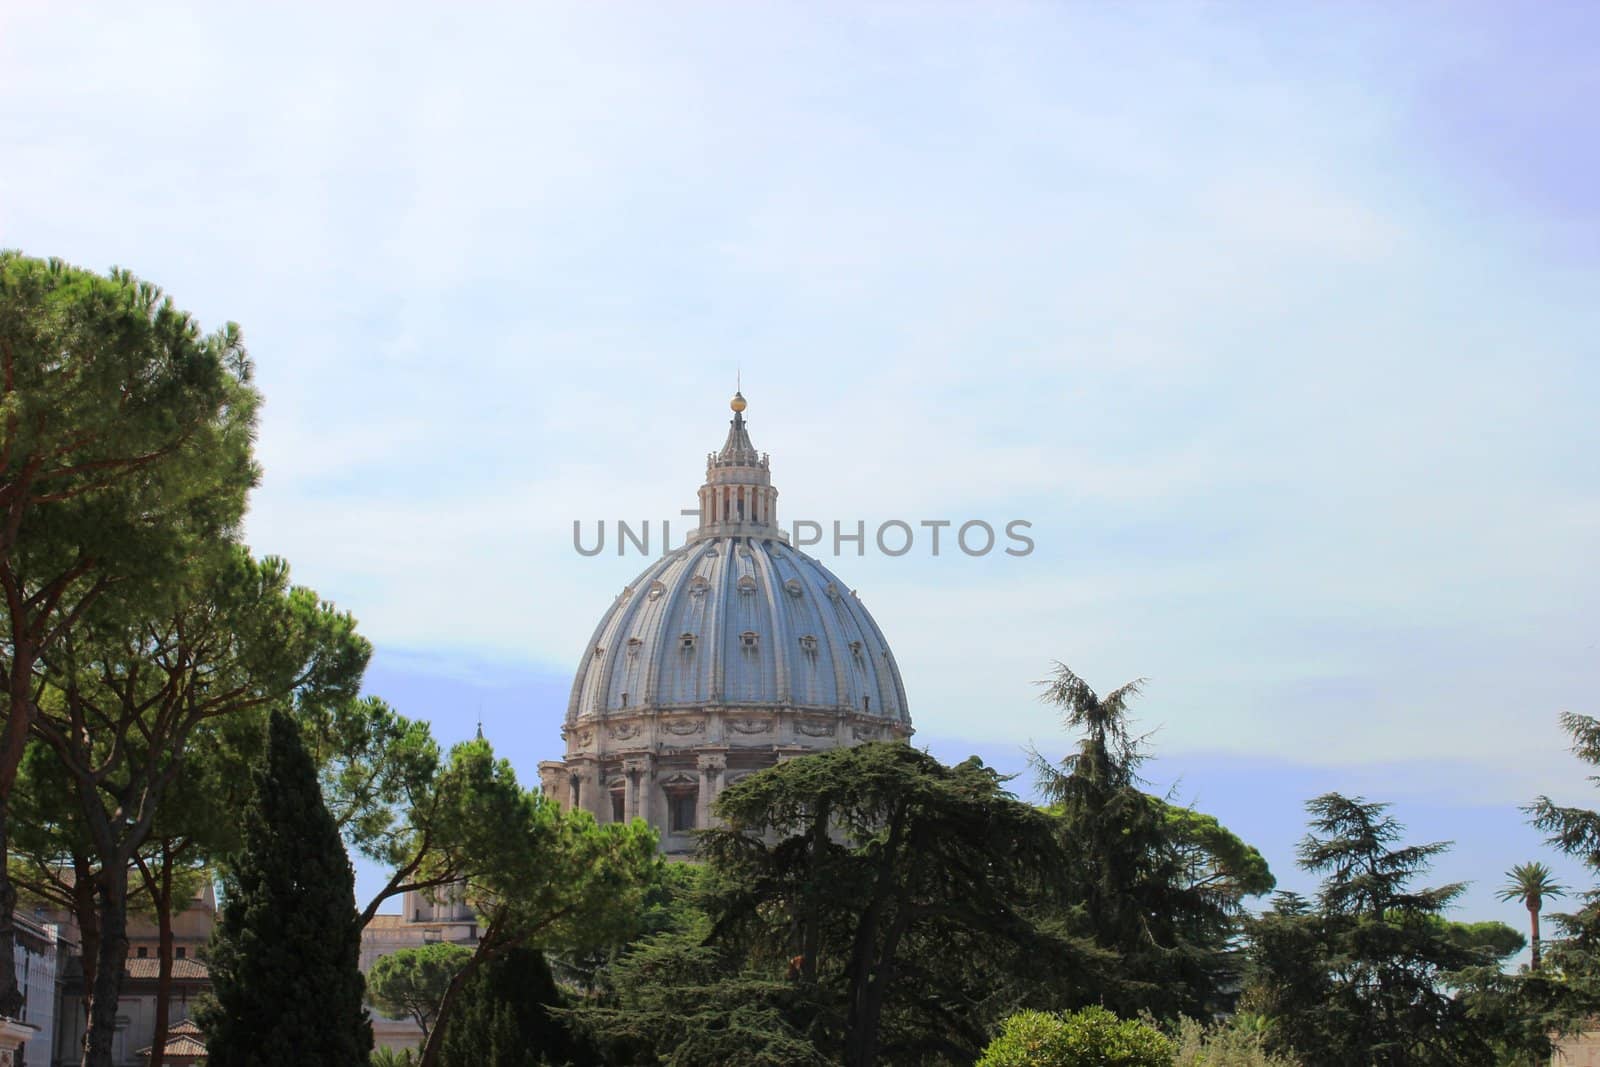 The dome of the Vatican by Metanna